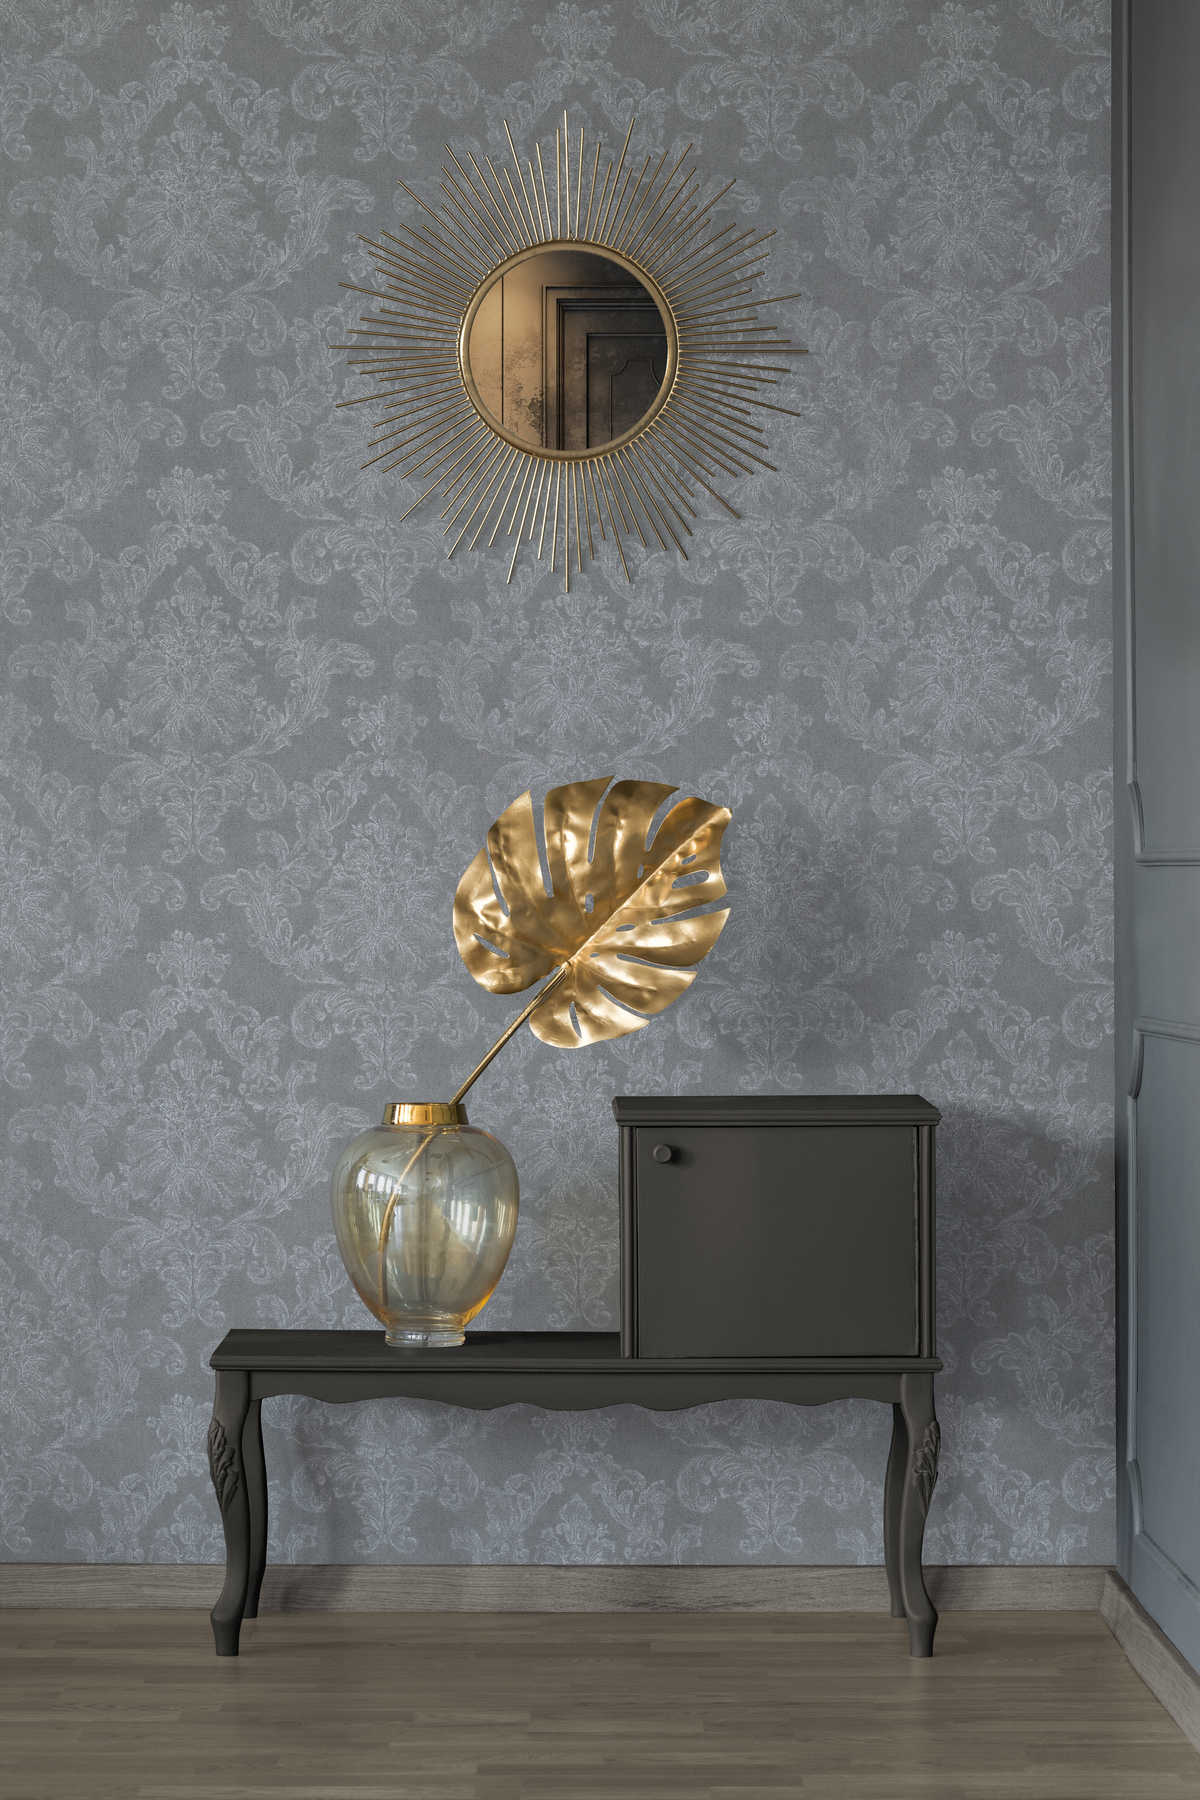             Ornament wallpaper in country style with textile look - grey, white
        